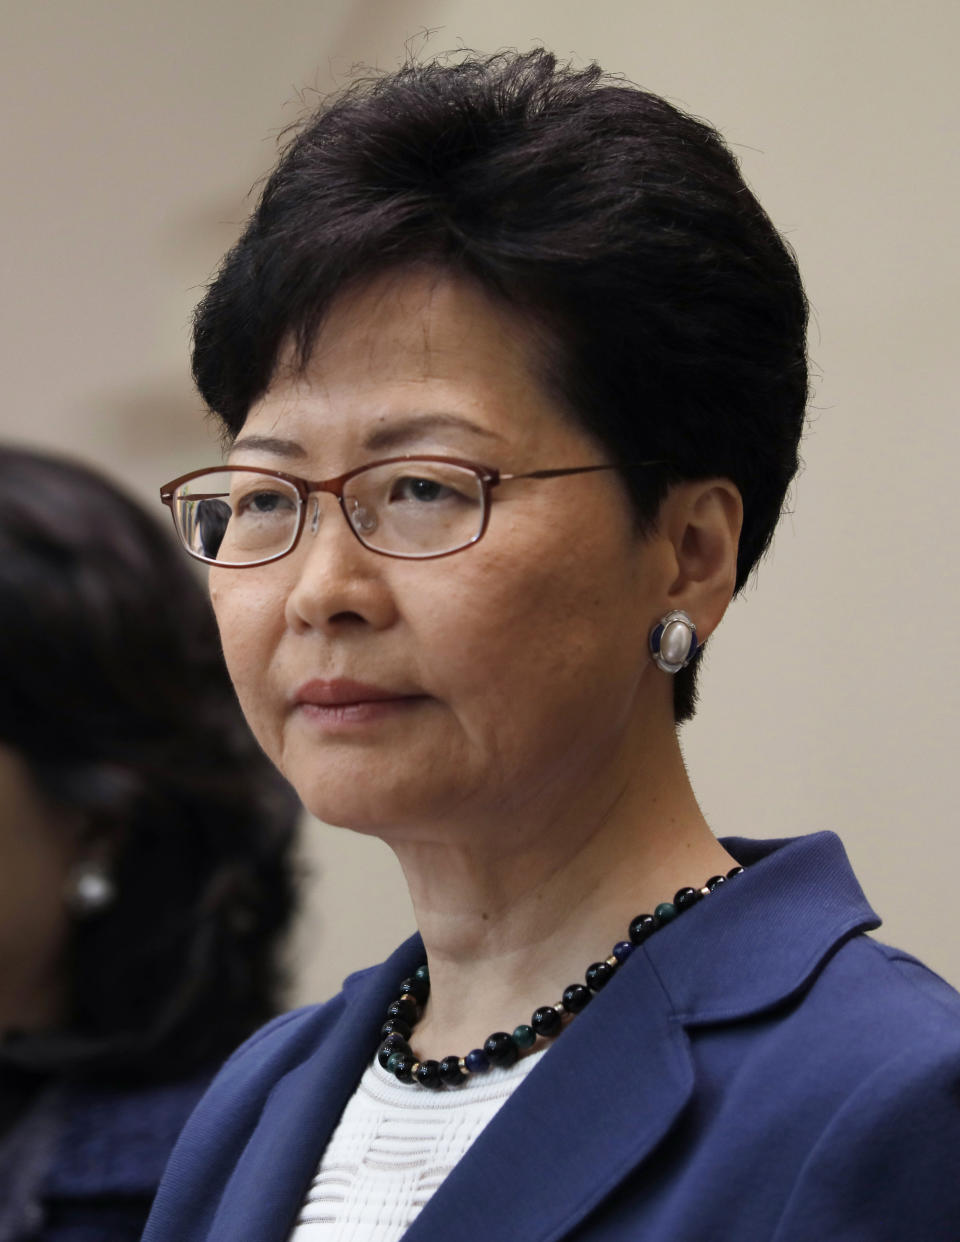 Hong Kong Chief Executive Carrie Lam listens to reporters questions during a press conference in Hong Kong Monday, June 10, 2019. Lam signaled Monday that her government will go ahead with proposed amendments to its extradition laws after a massive protest against them. (AP Photo/Vincent Yu)